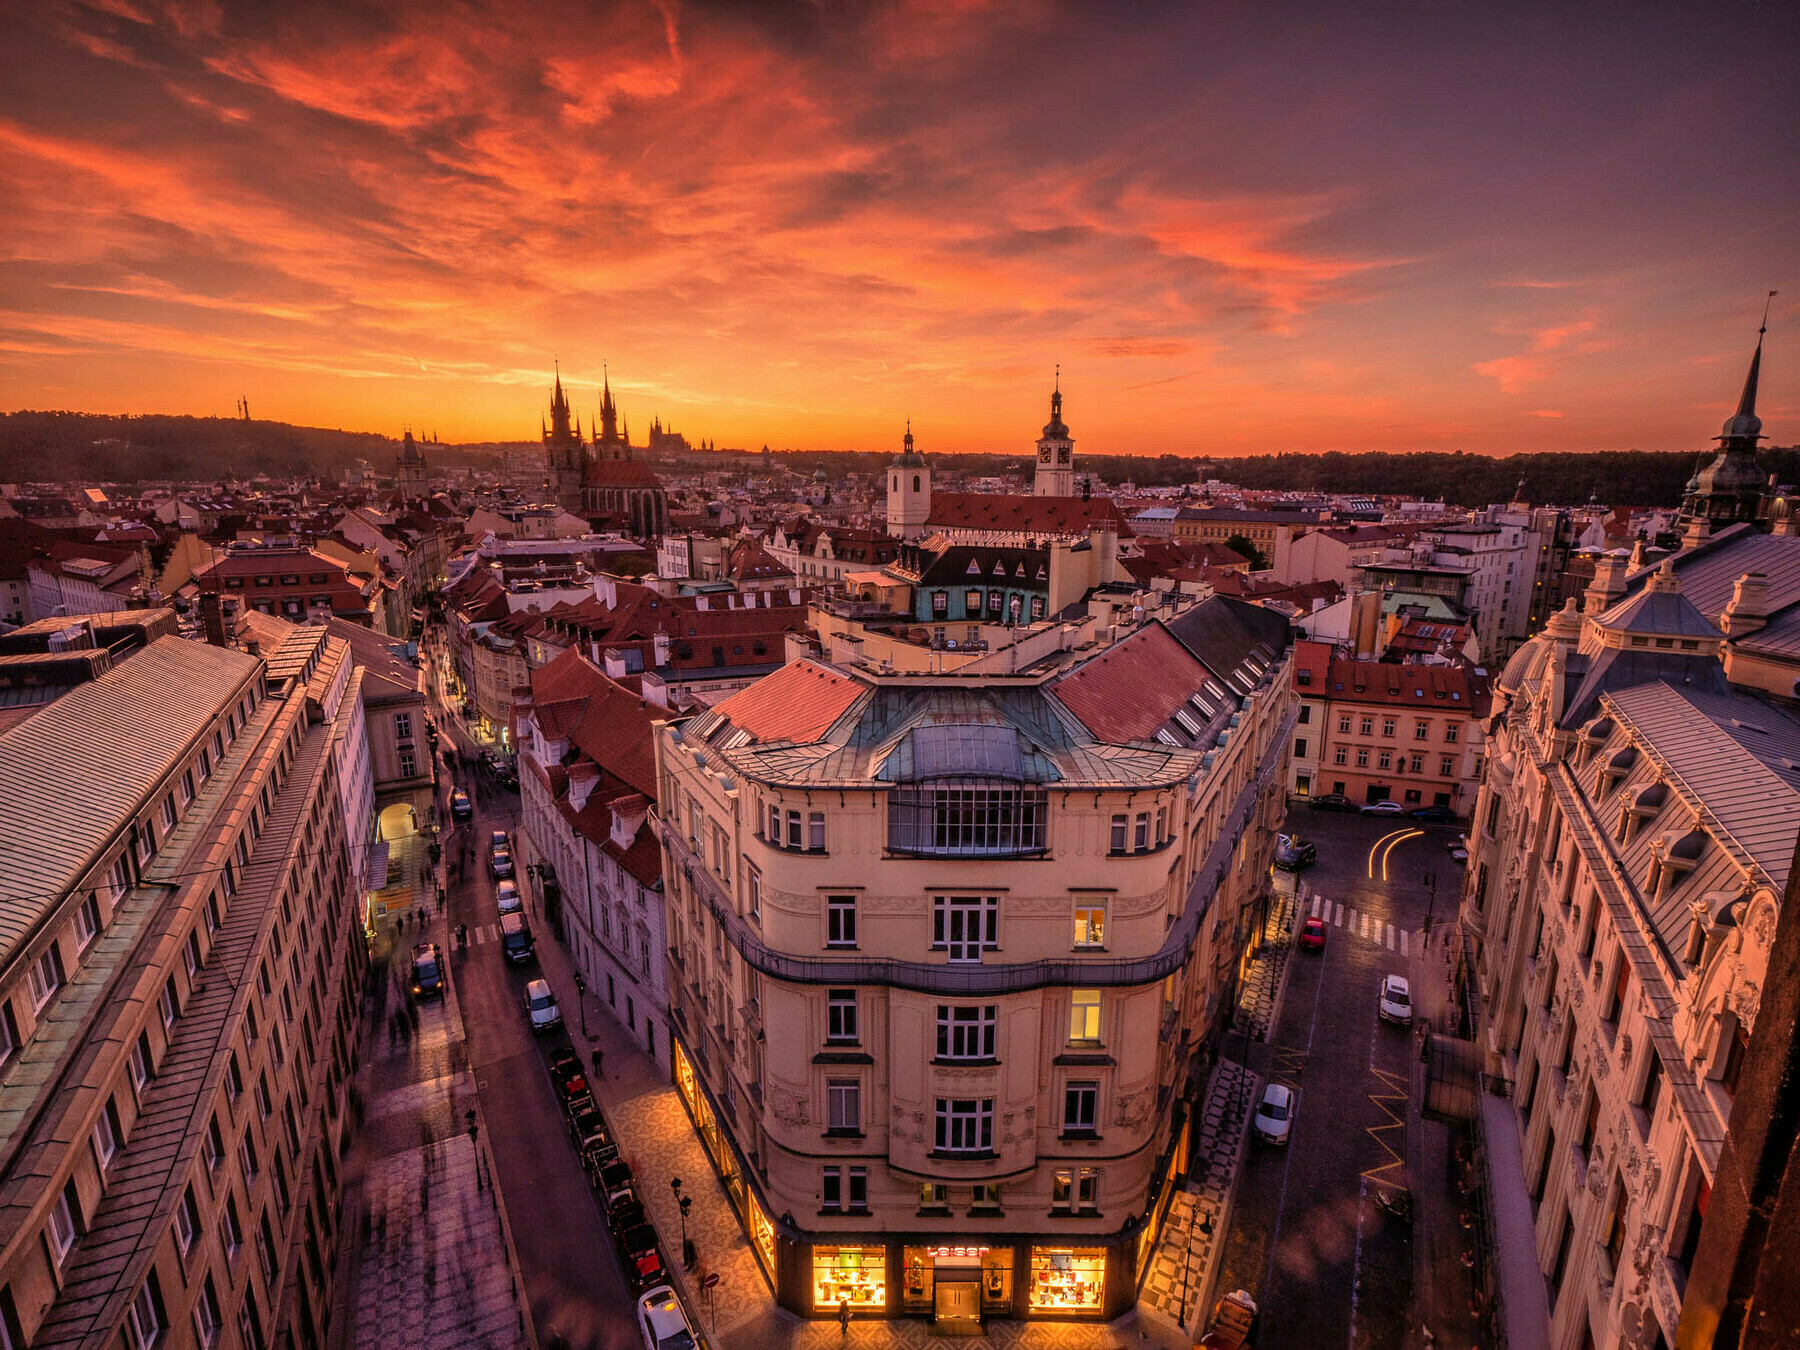 A spectacular sunset cityscape of Prague captured from Powder Gate with views to the distant cathedral and castle.